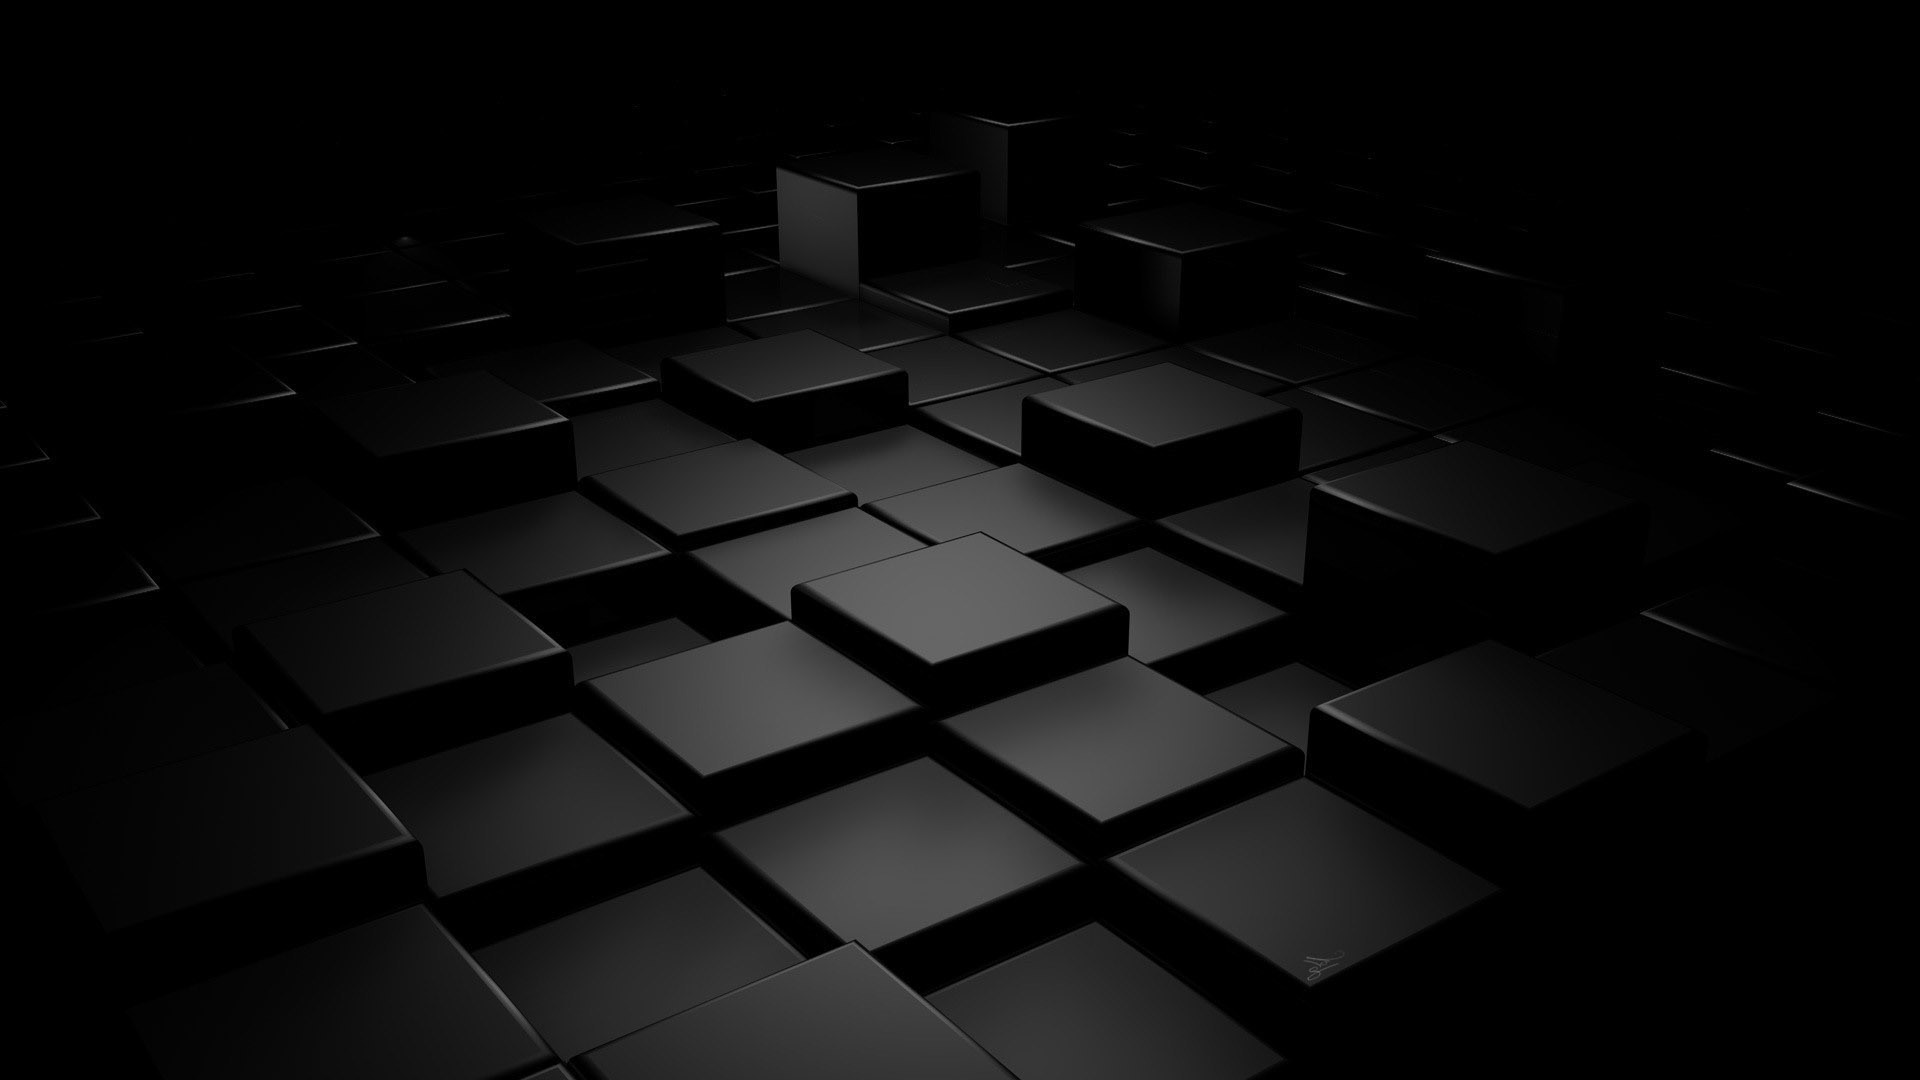 Black Abstract Wallpaper Image Photos Pictures Background